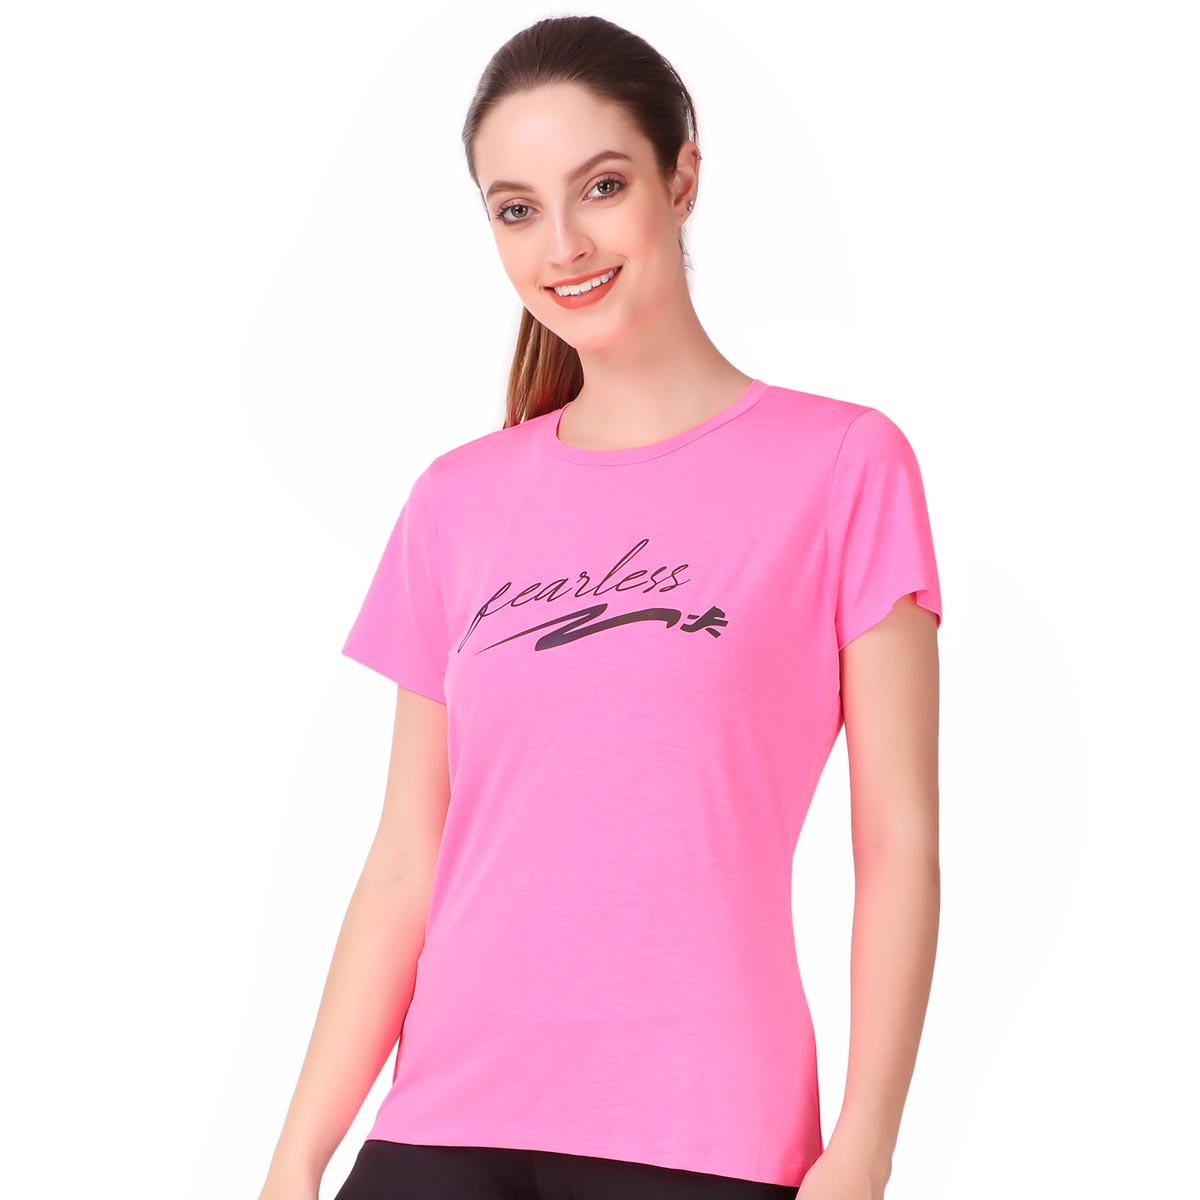 Performance Tshirt For Fearless Women (Neon Pink)